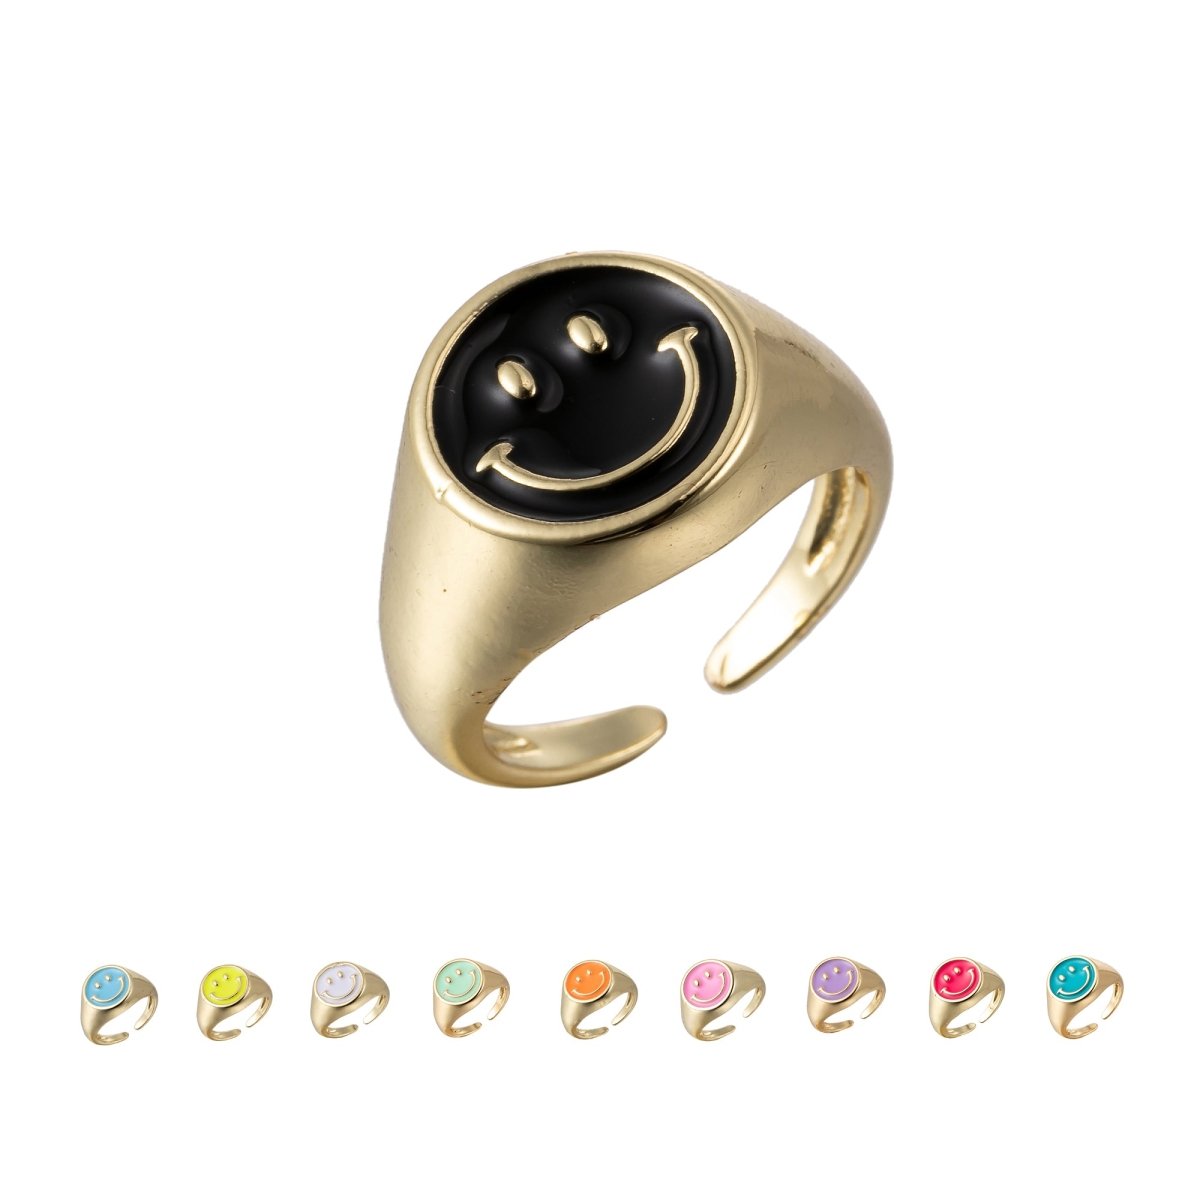 Adjustable Gold Smiley Face Ring, Colorful Enamel Happy Face Signet Ring y2k Jewelry O-881~O-885 O-887~O-891 - DLUXCA